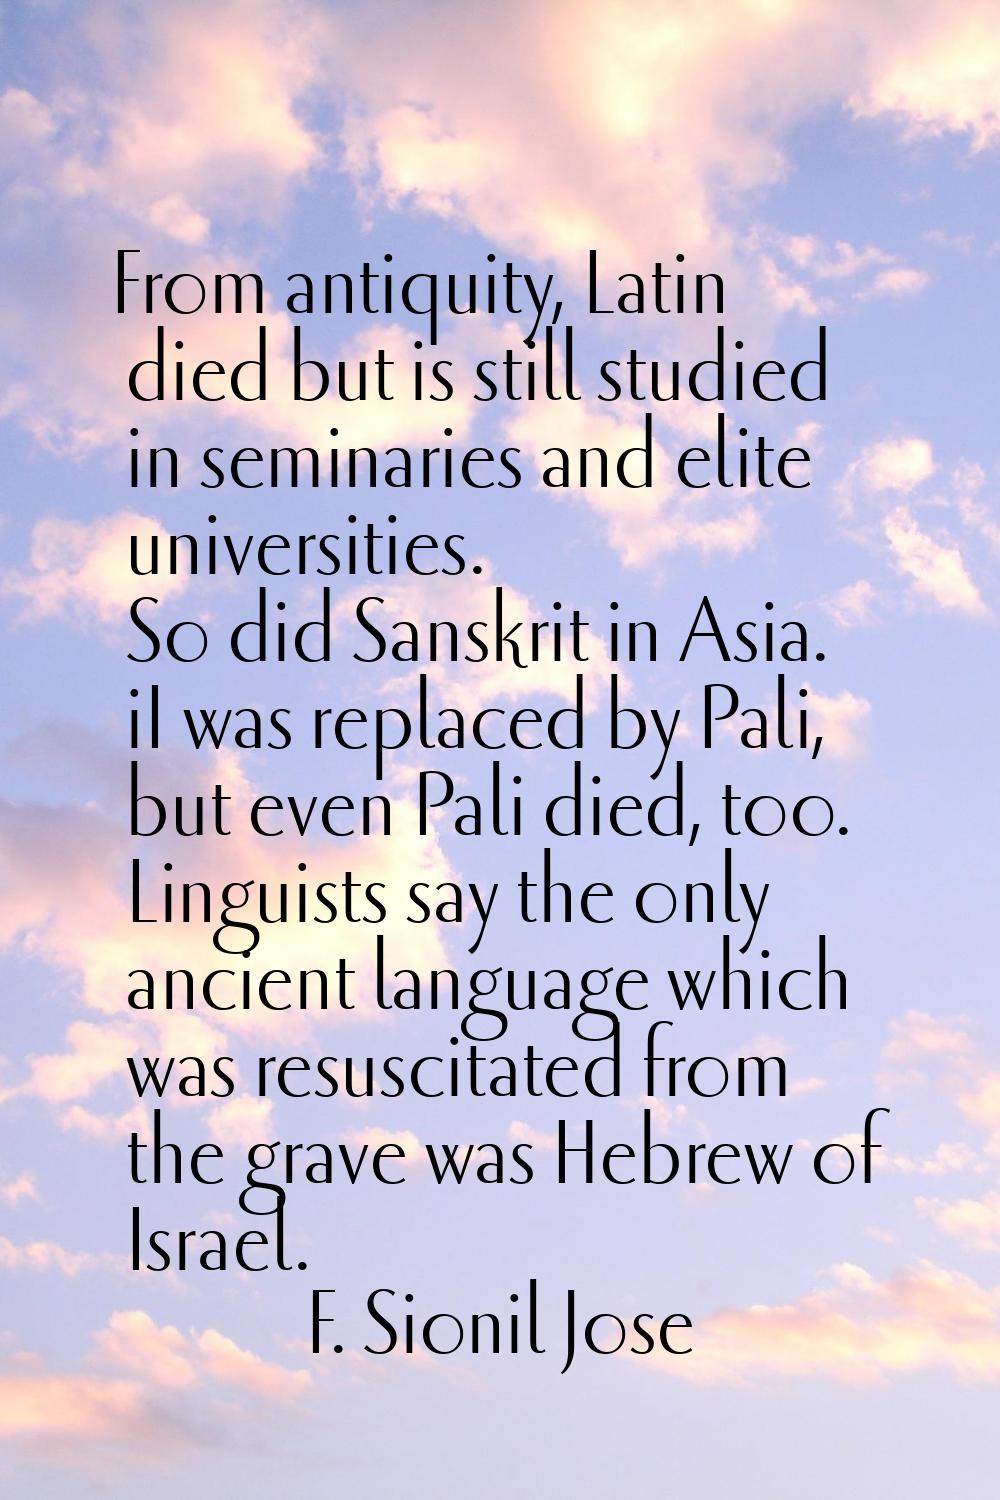 From antiquity, Latin died but is still studied in seminaries and elite universities. So did Sanskr